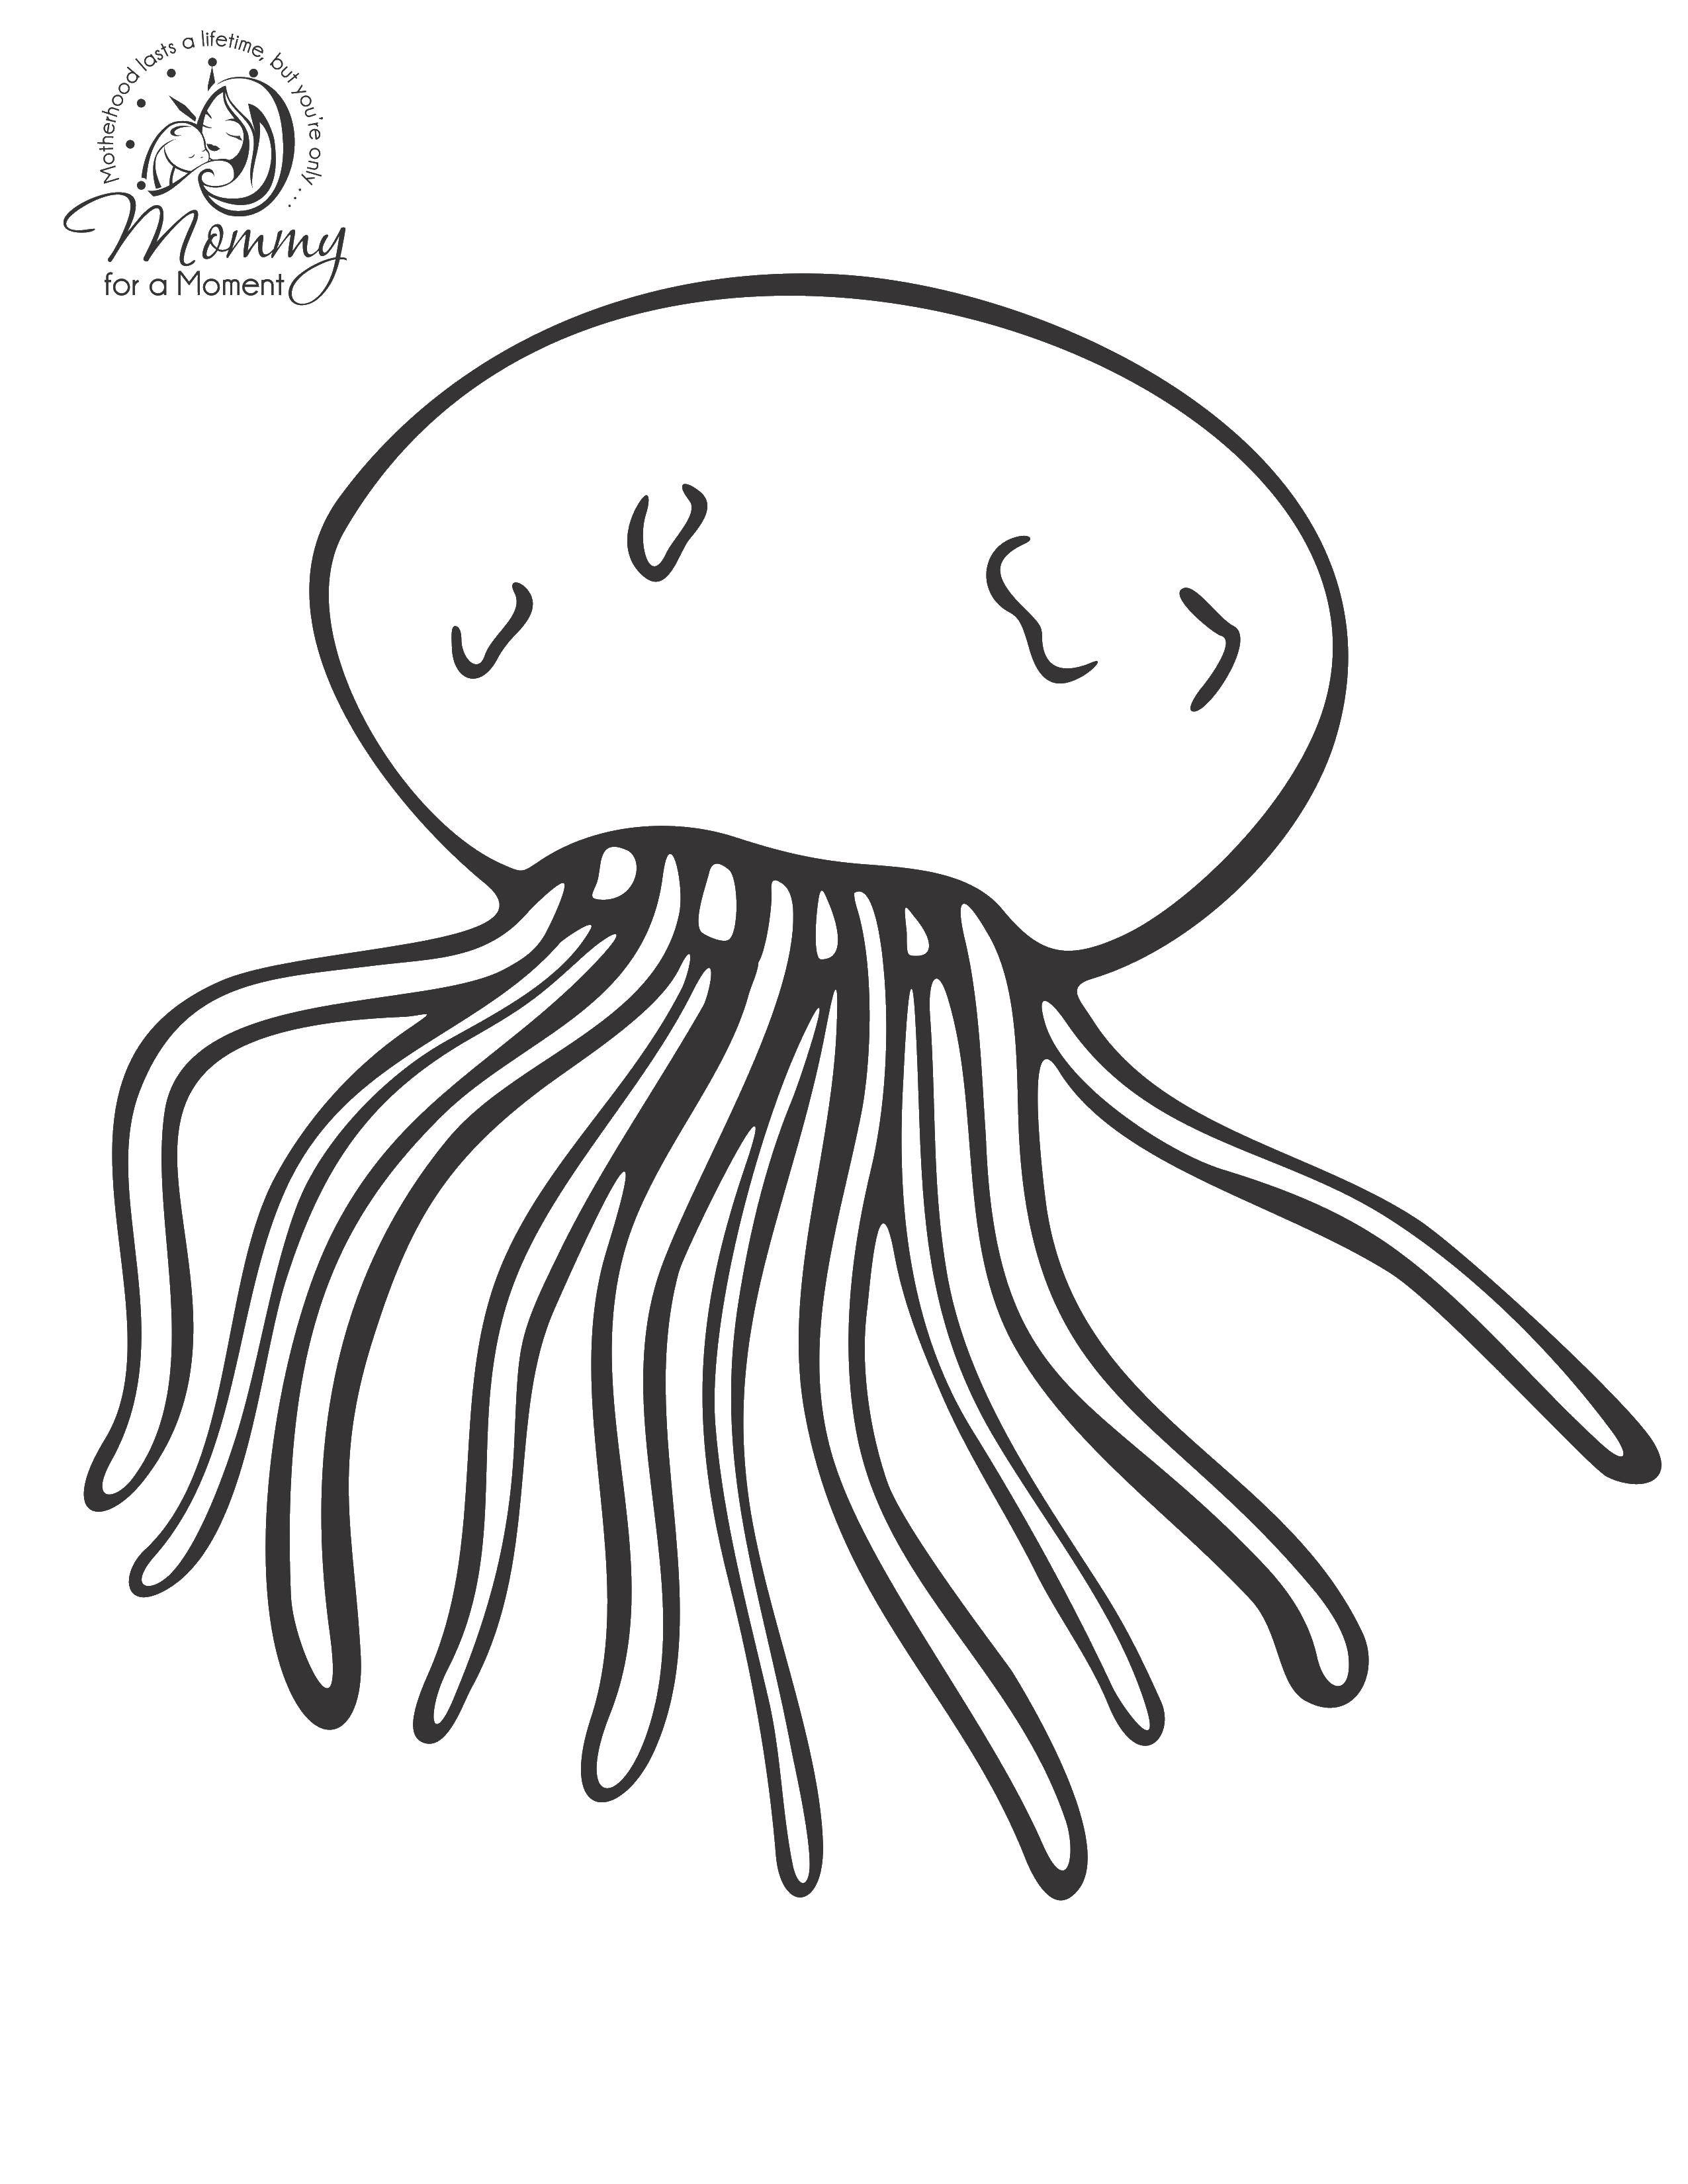 Coloring 10 tentacles. Category Sea animals. Tags:  Underwater world, jellyfish.